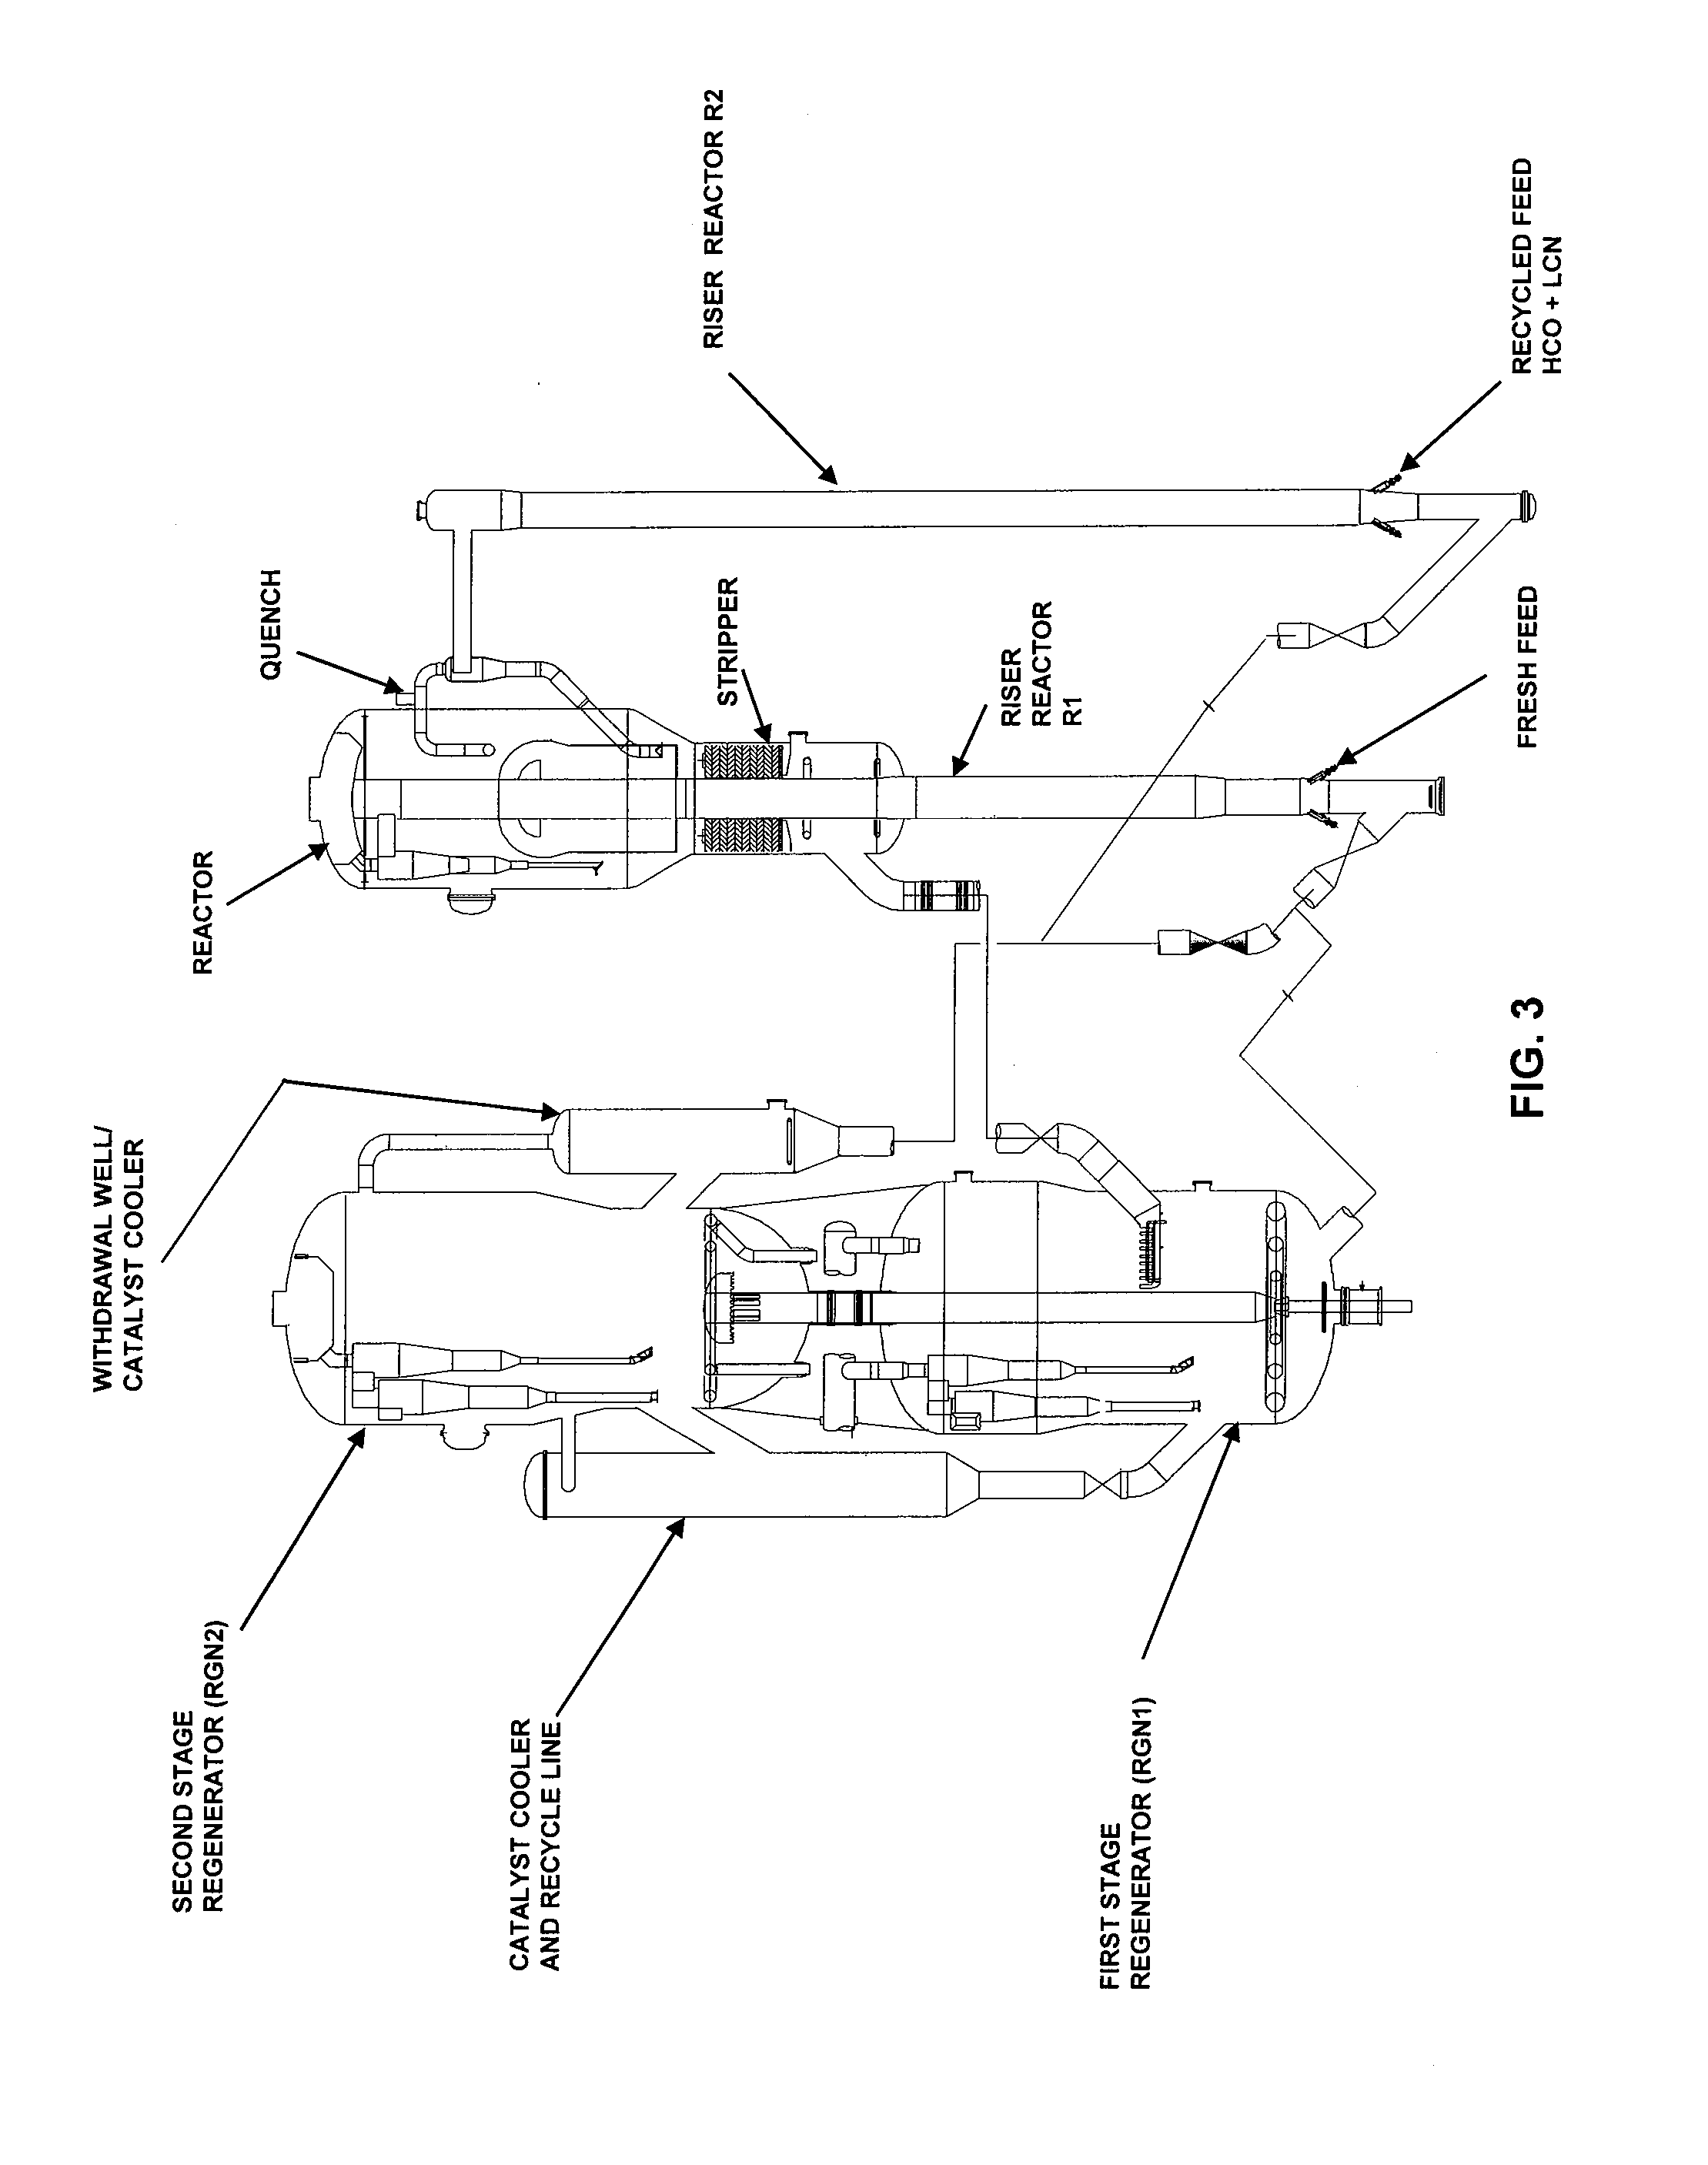 Process for maximum distillate production from fluid catalytic cracking units (FCCU)